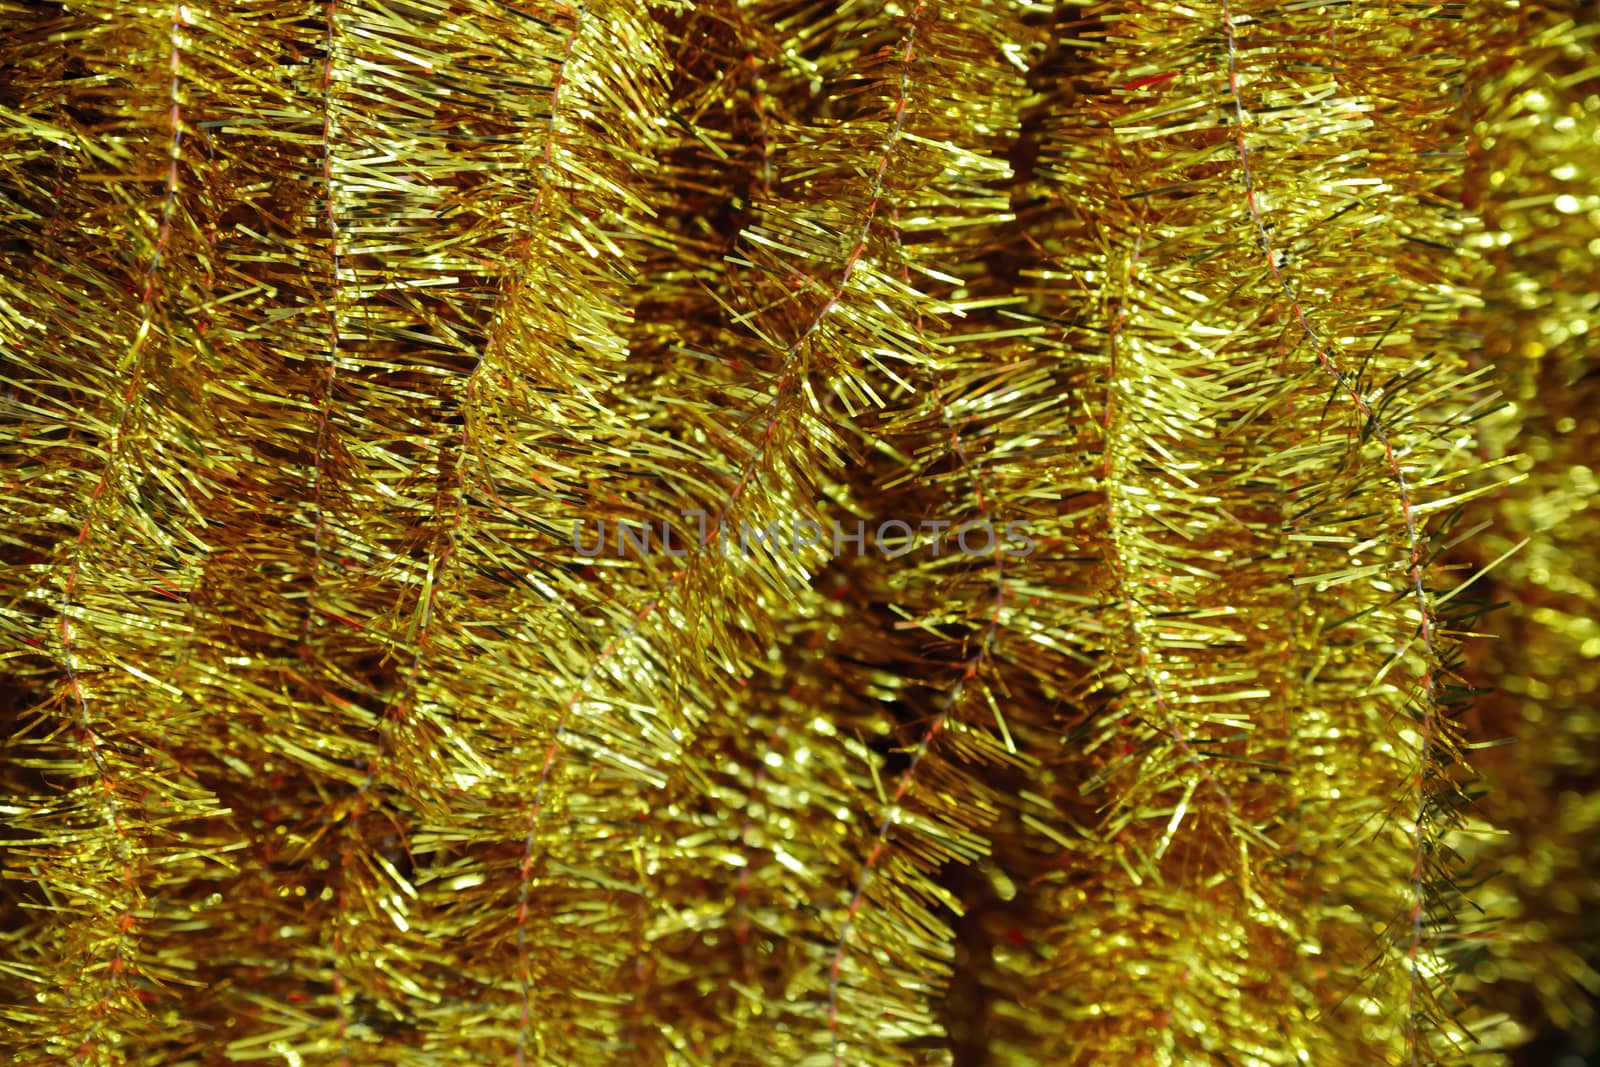 Christmas decoration on abstract background. Blurred background.